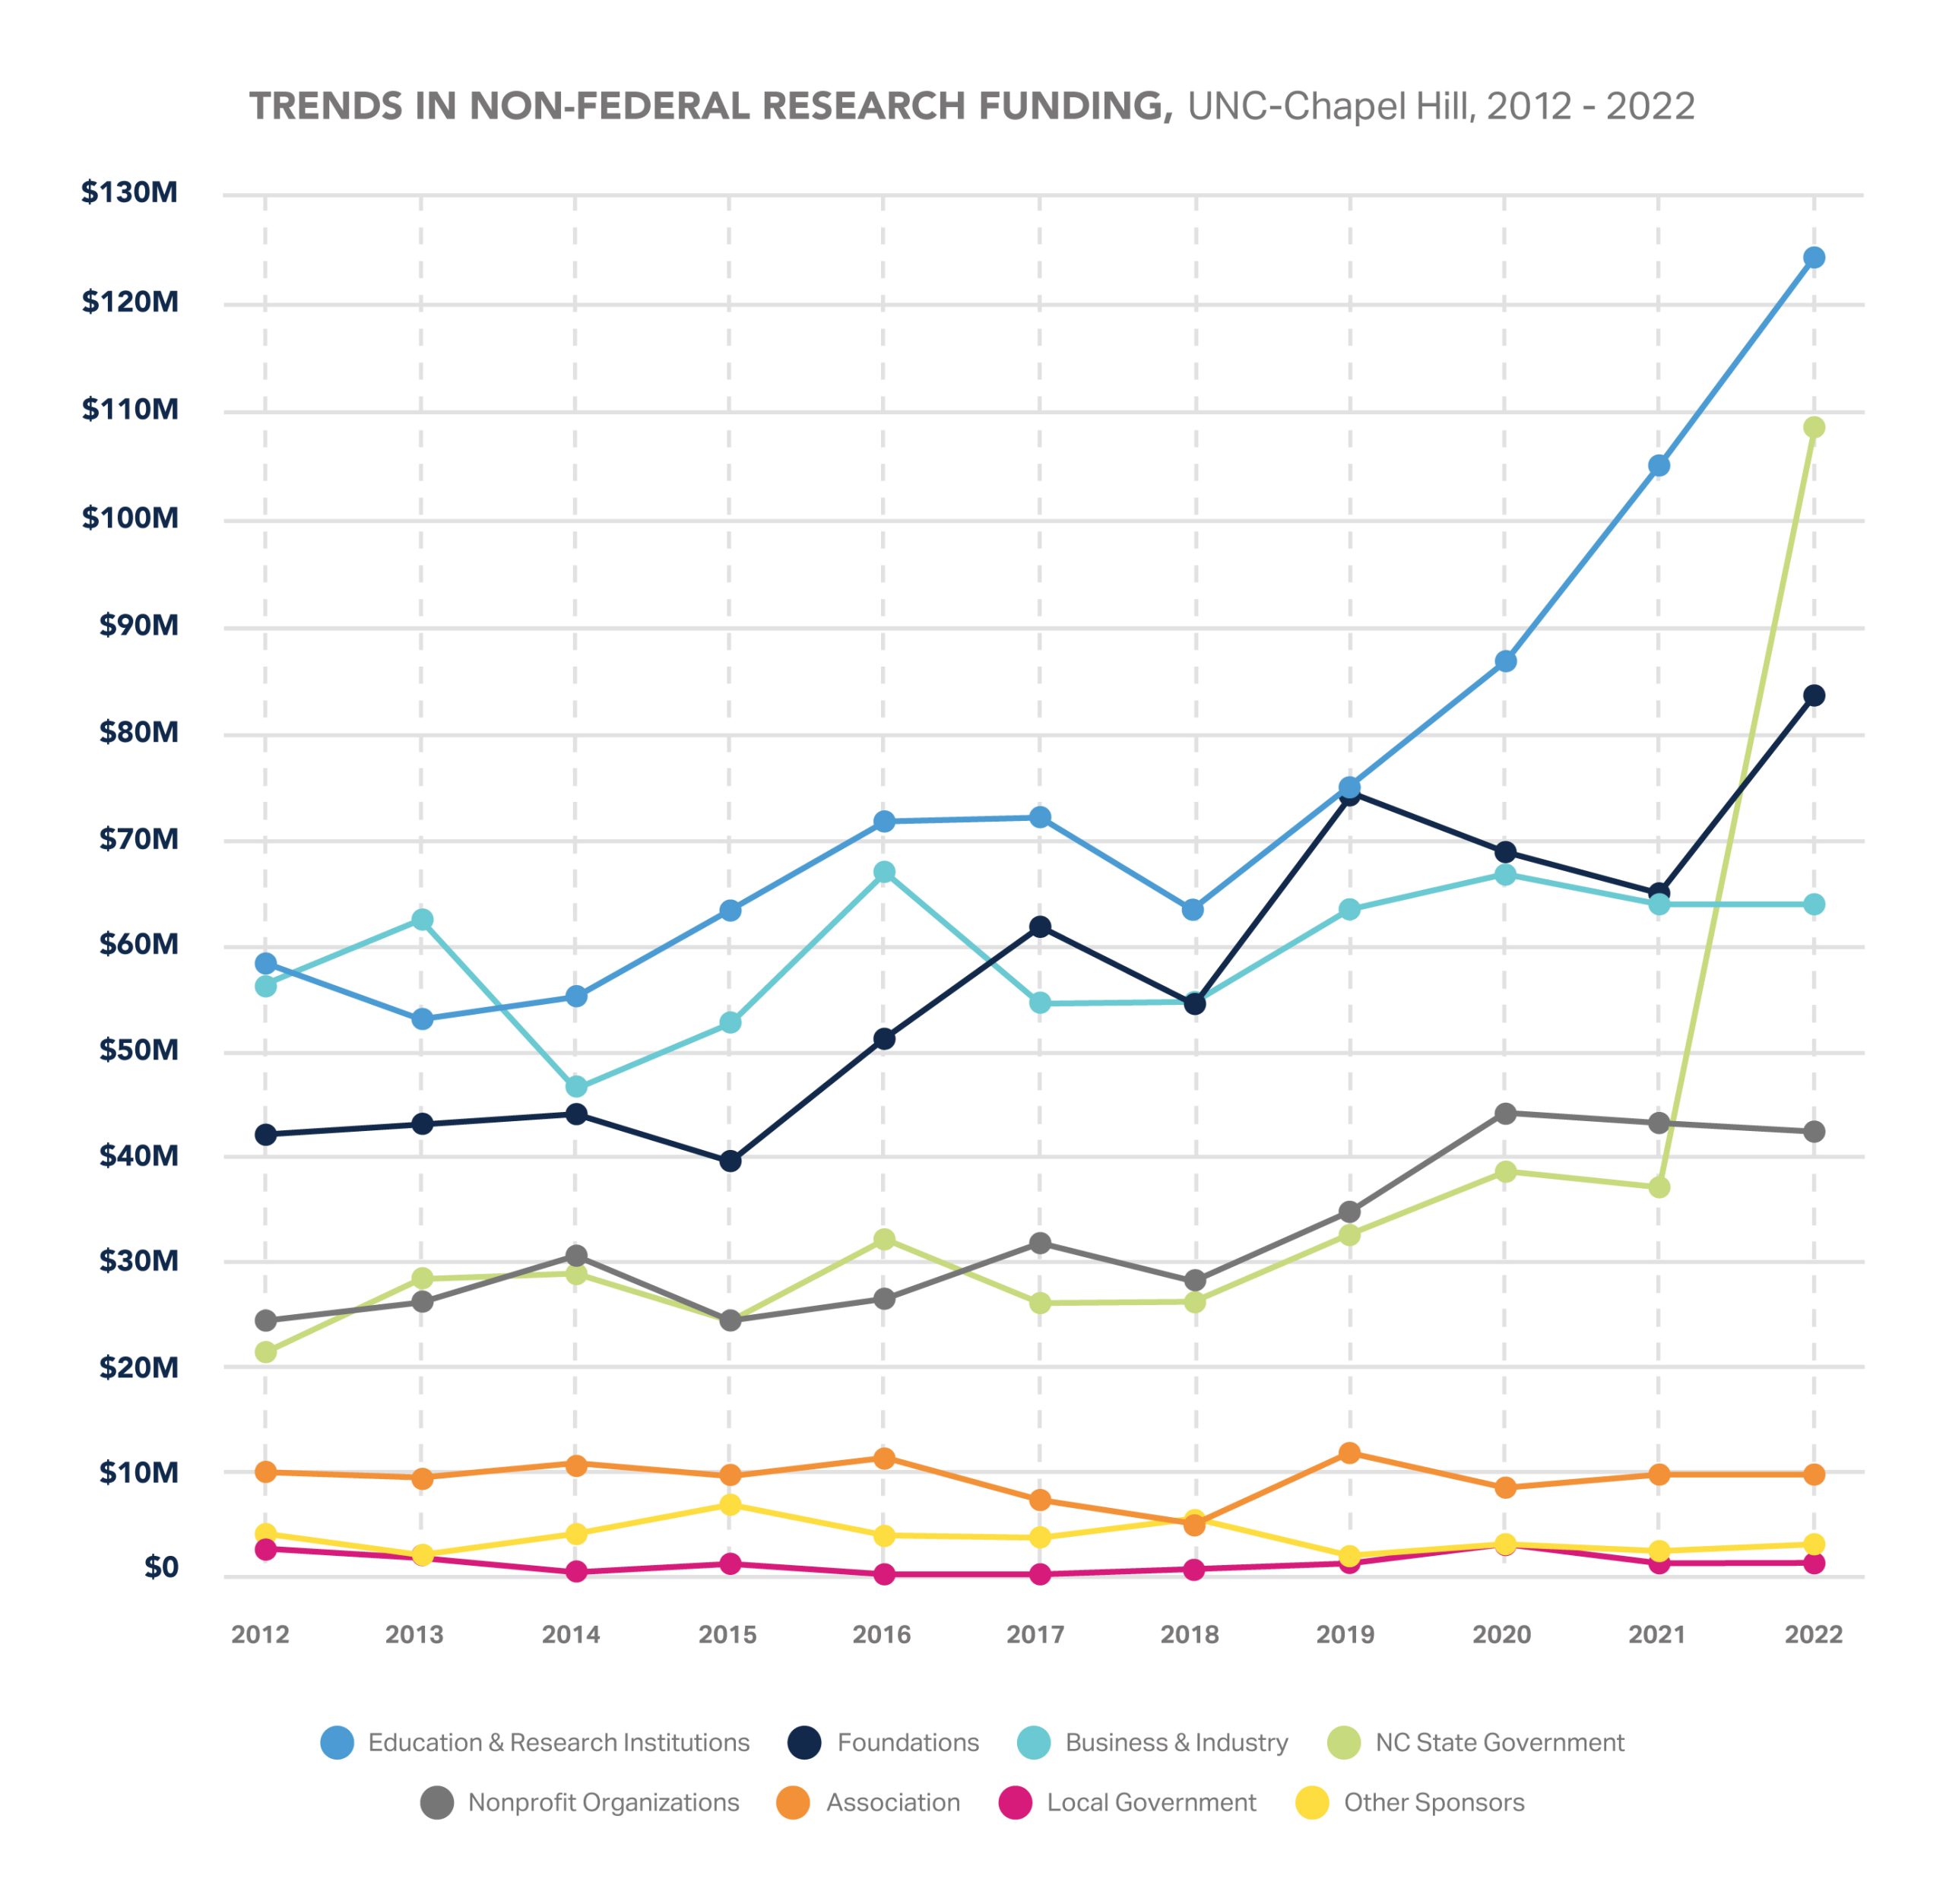 Trends in Non-federal Research Funding at UNC at Chapel Hill. In 2022, education and research institutions accounted for $125,532,335, foundation for $83,865,060, business and industry for $64,030,338, North Carolina State Government for $109,207,973, nonprofit organizations for $42,372,483, associations for $9,664,971, local government for $1,455,757, and other sponsors for $3,119,164.